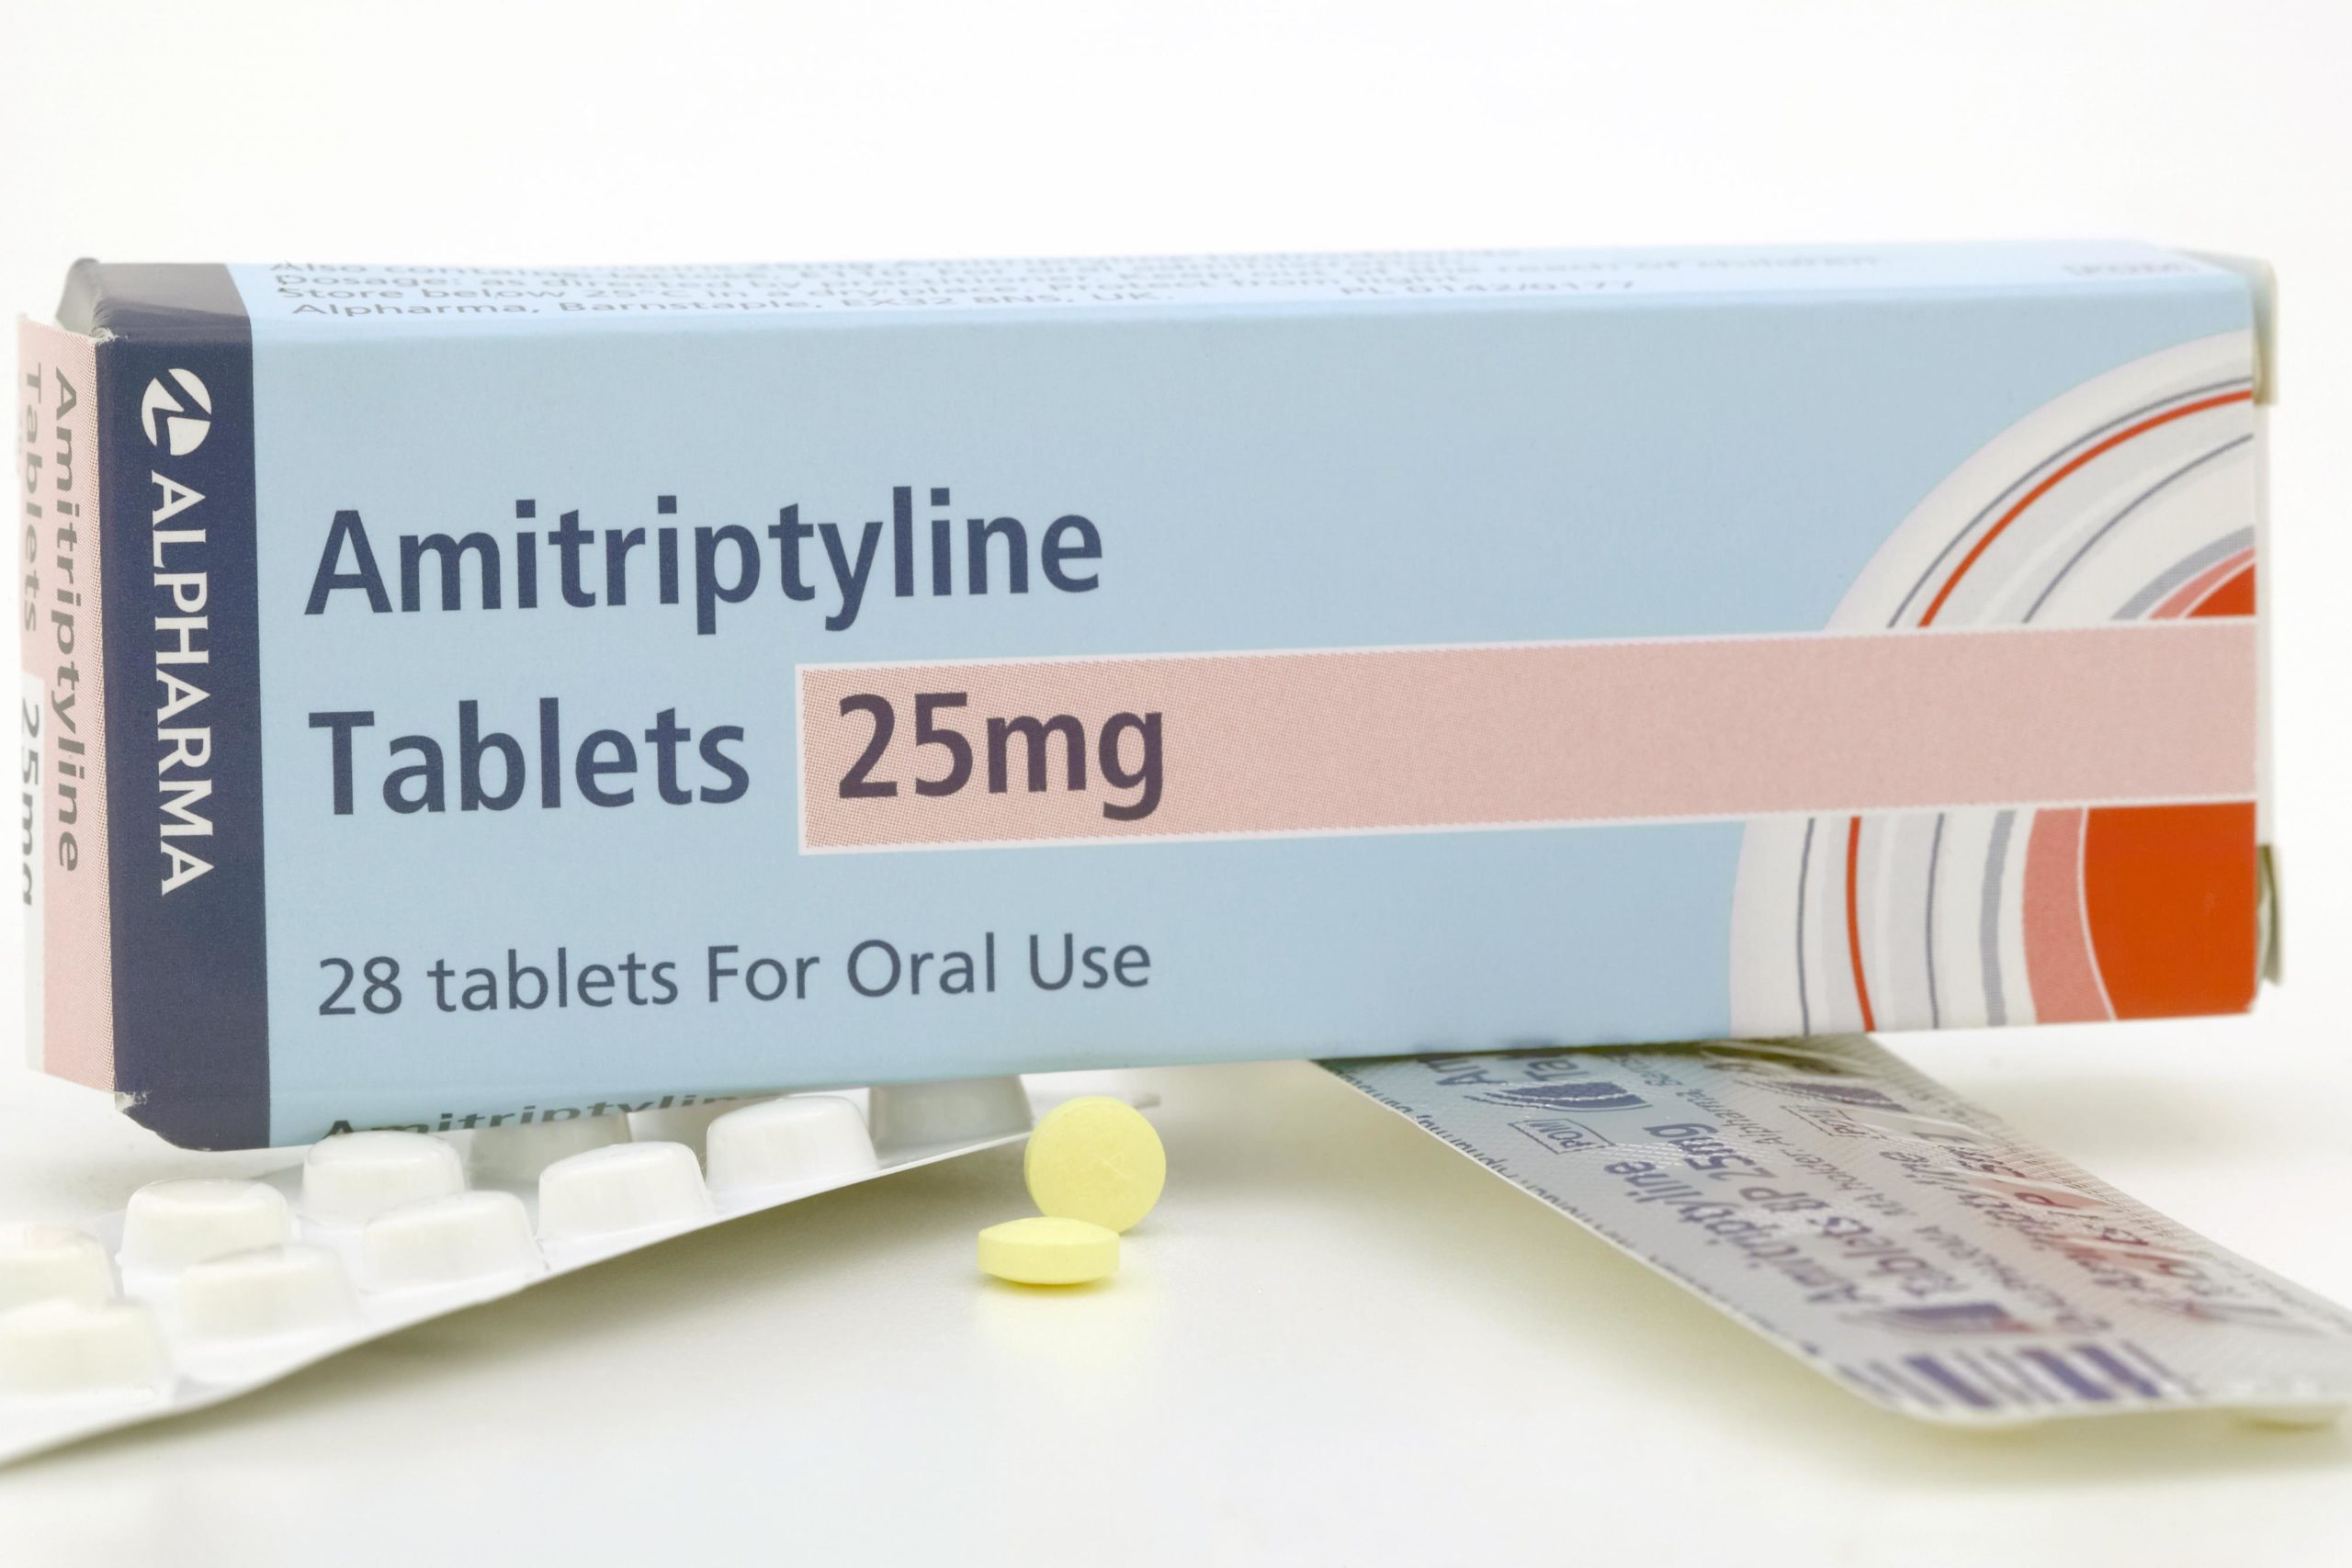 Amitriptyline: Uses, Dosage and Side Effects